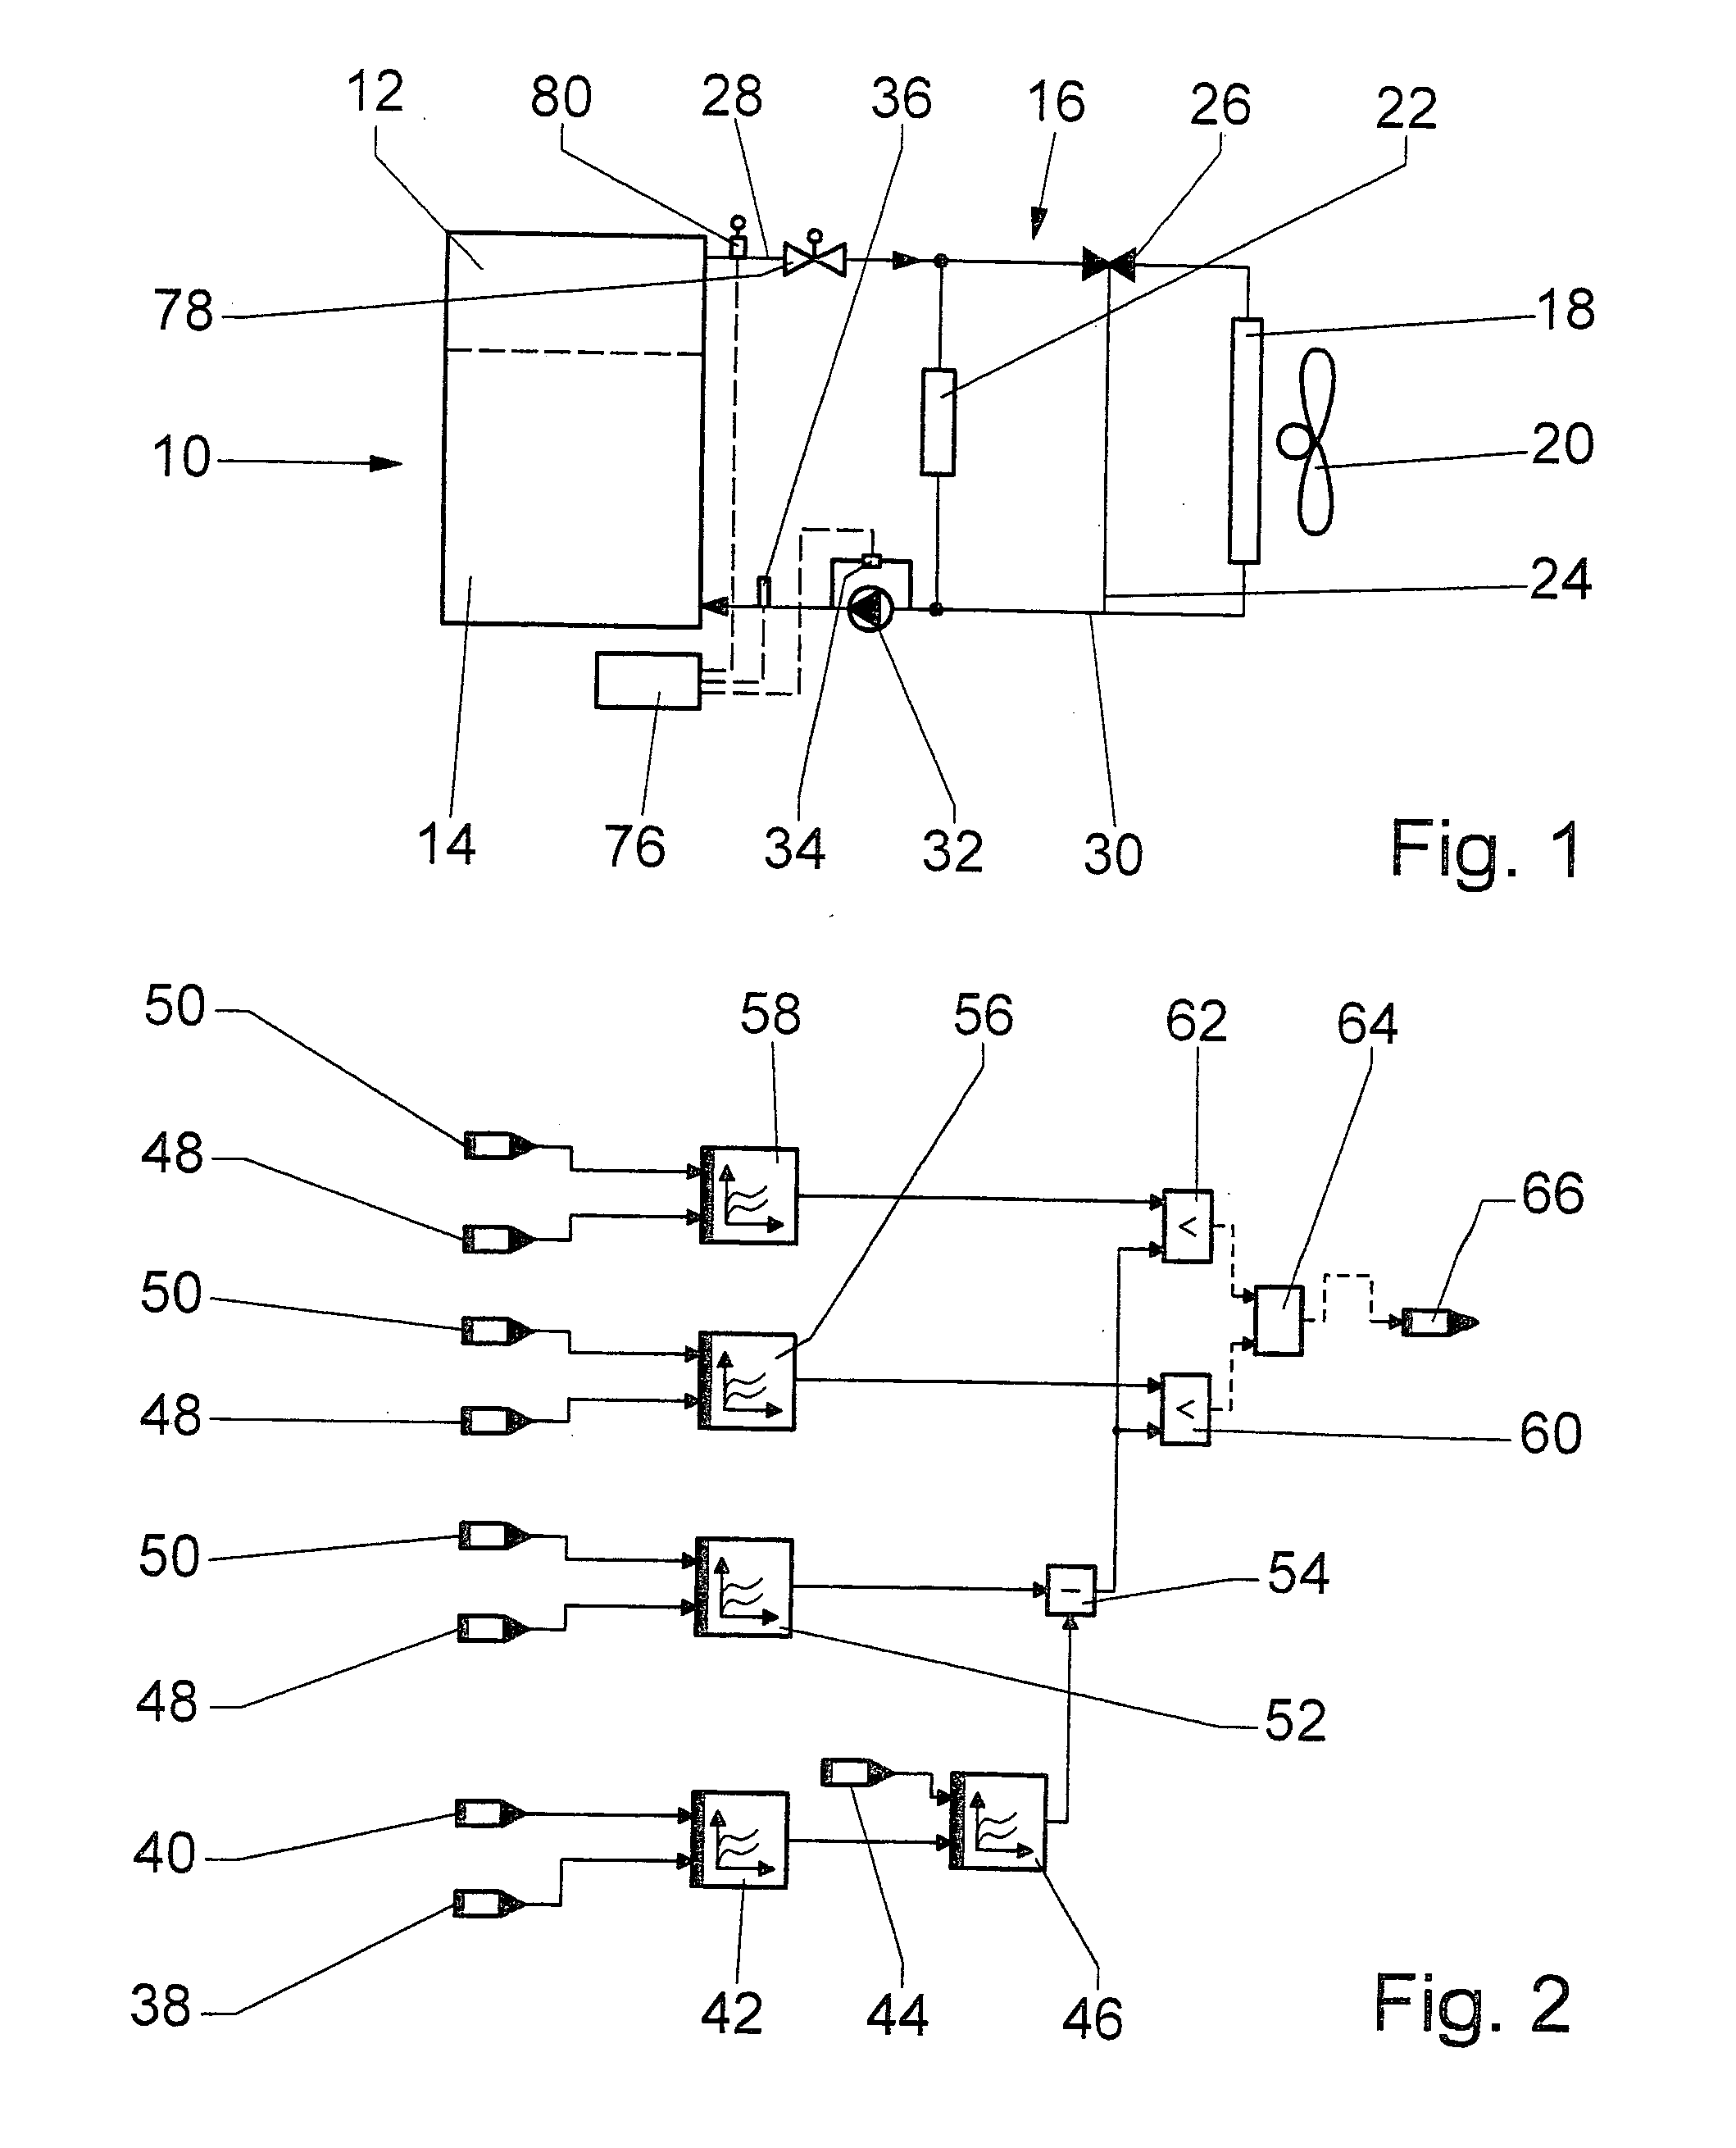 Method for monitoring a coolant circuit of an internal combustion engine